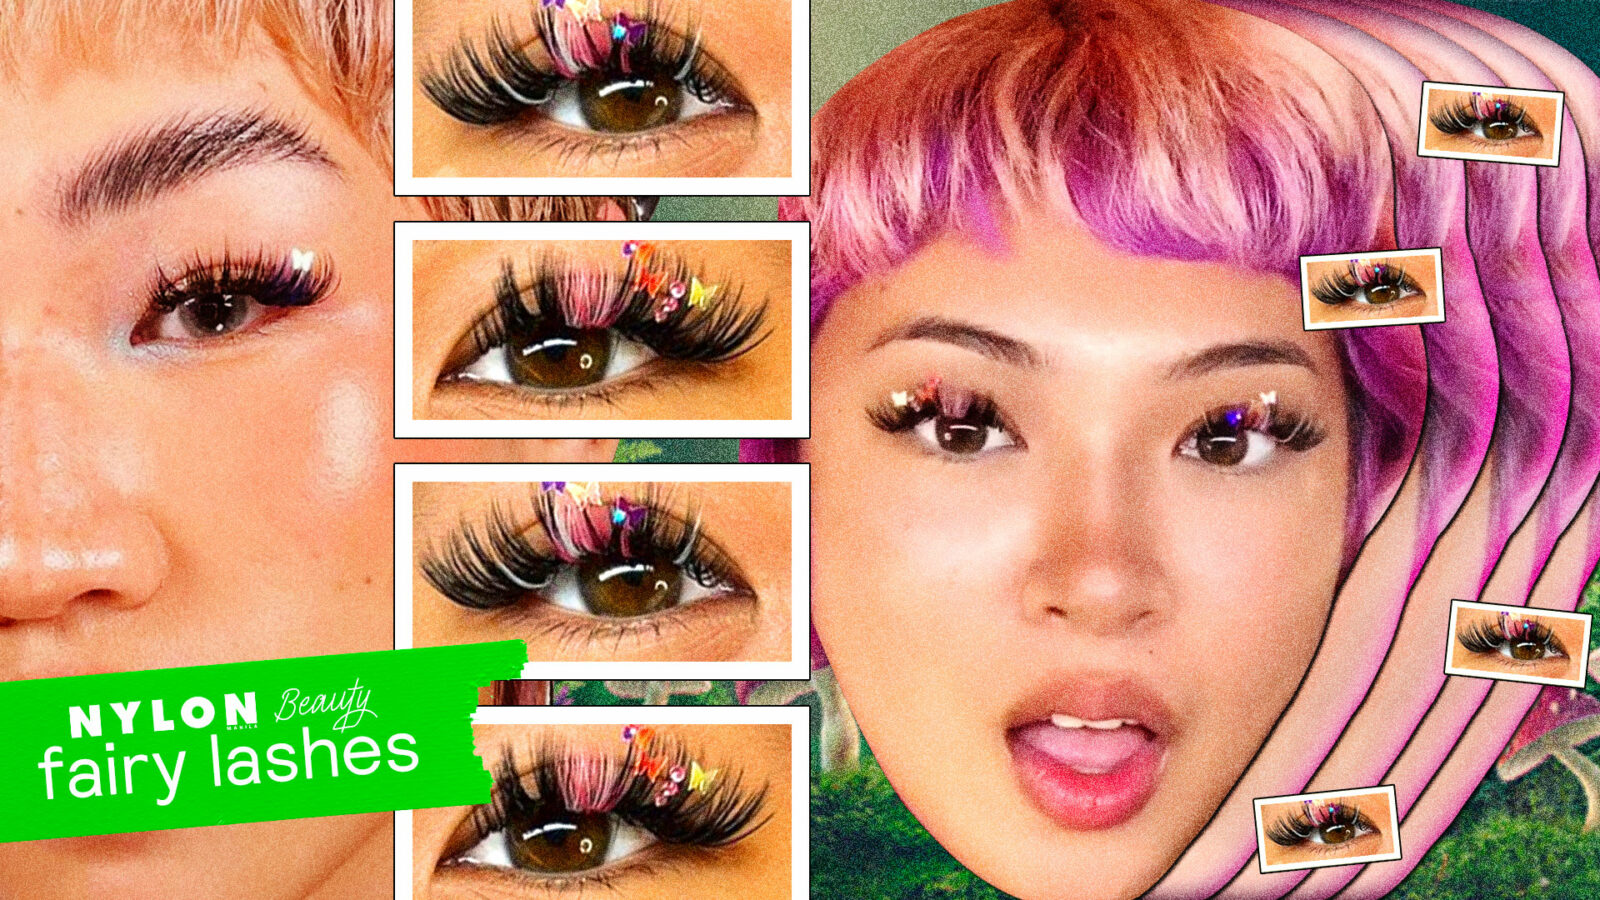 nylon-manila-beauty-fairy-lashes collage by kenneth dimaano